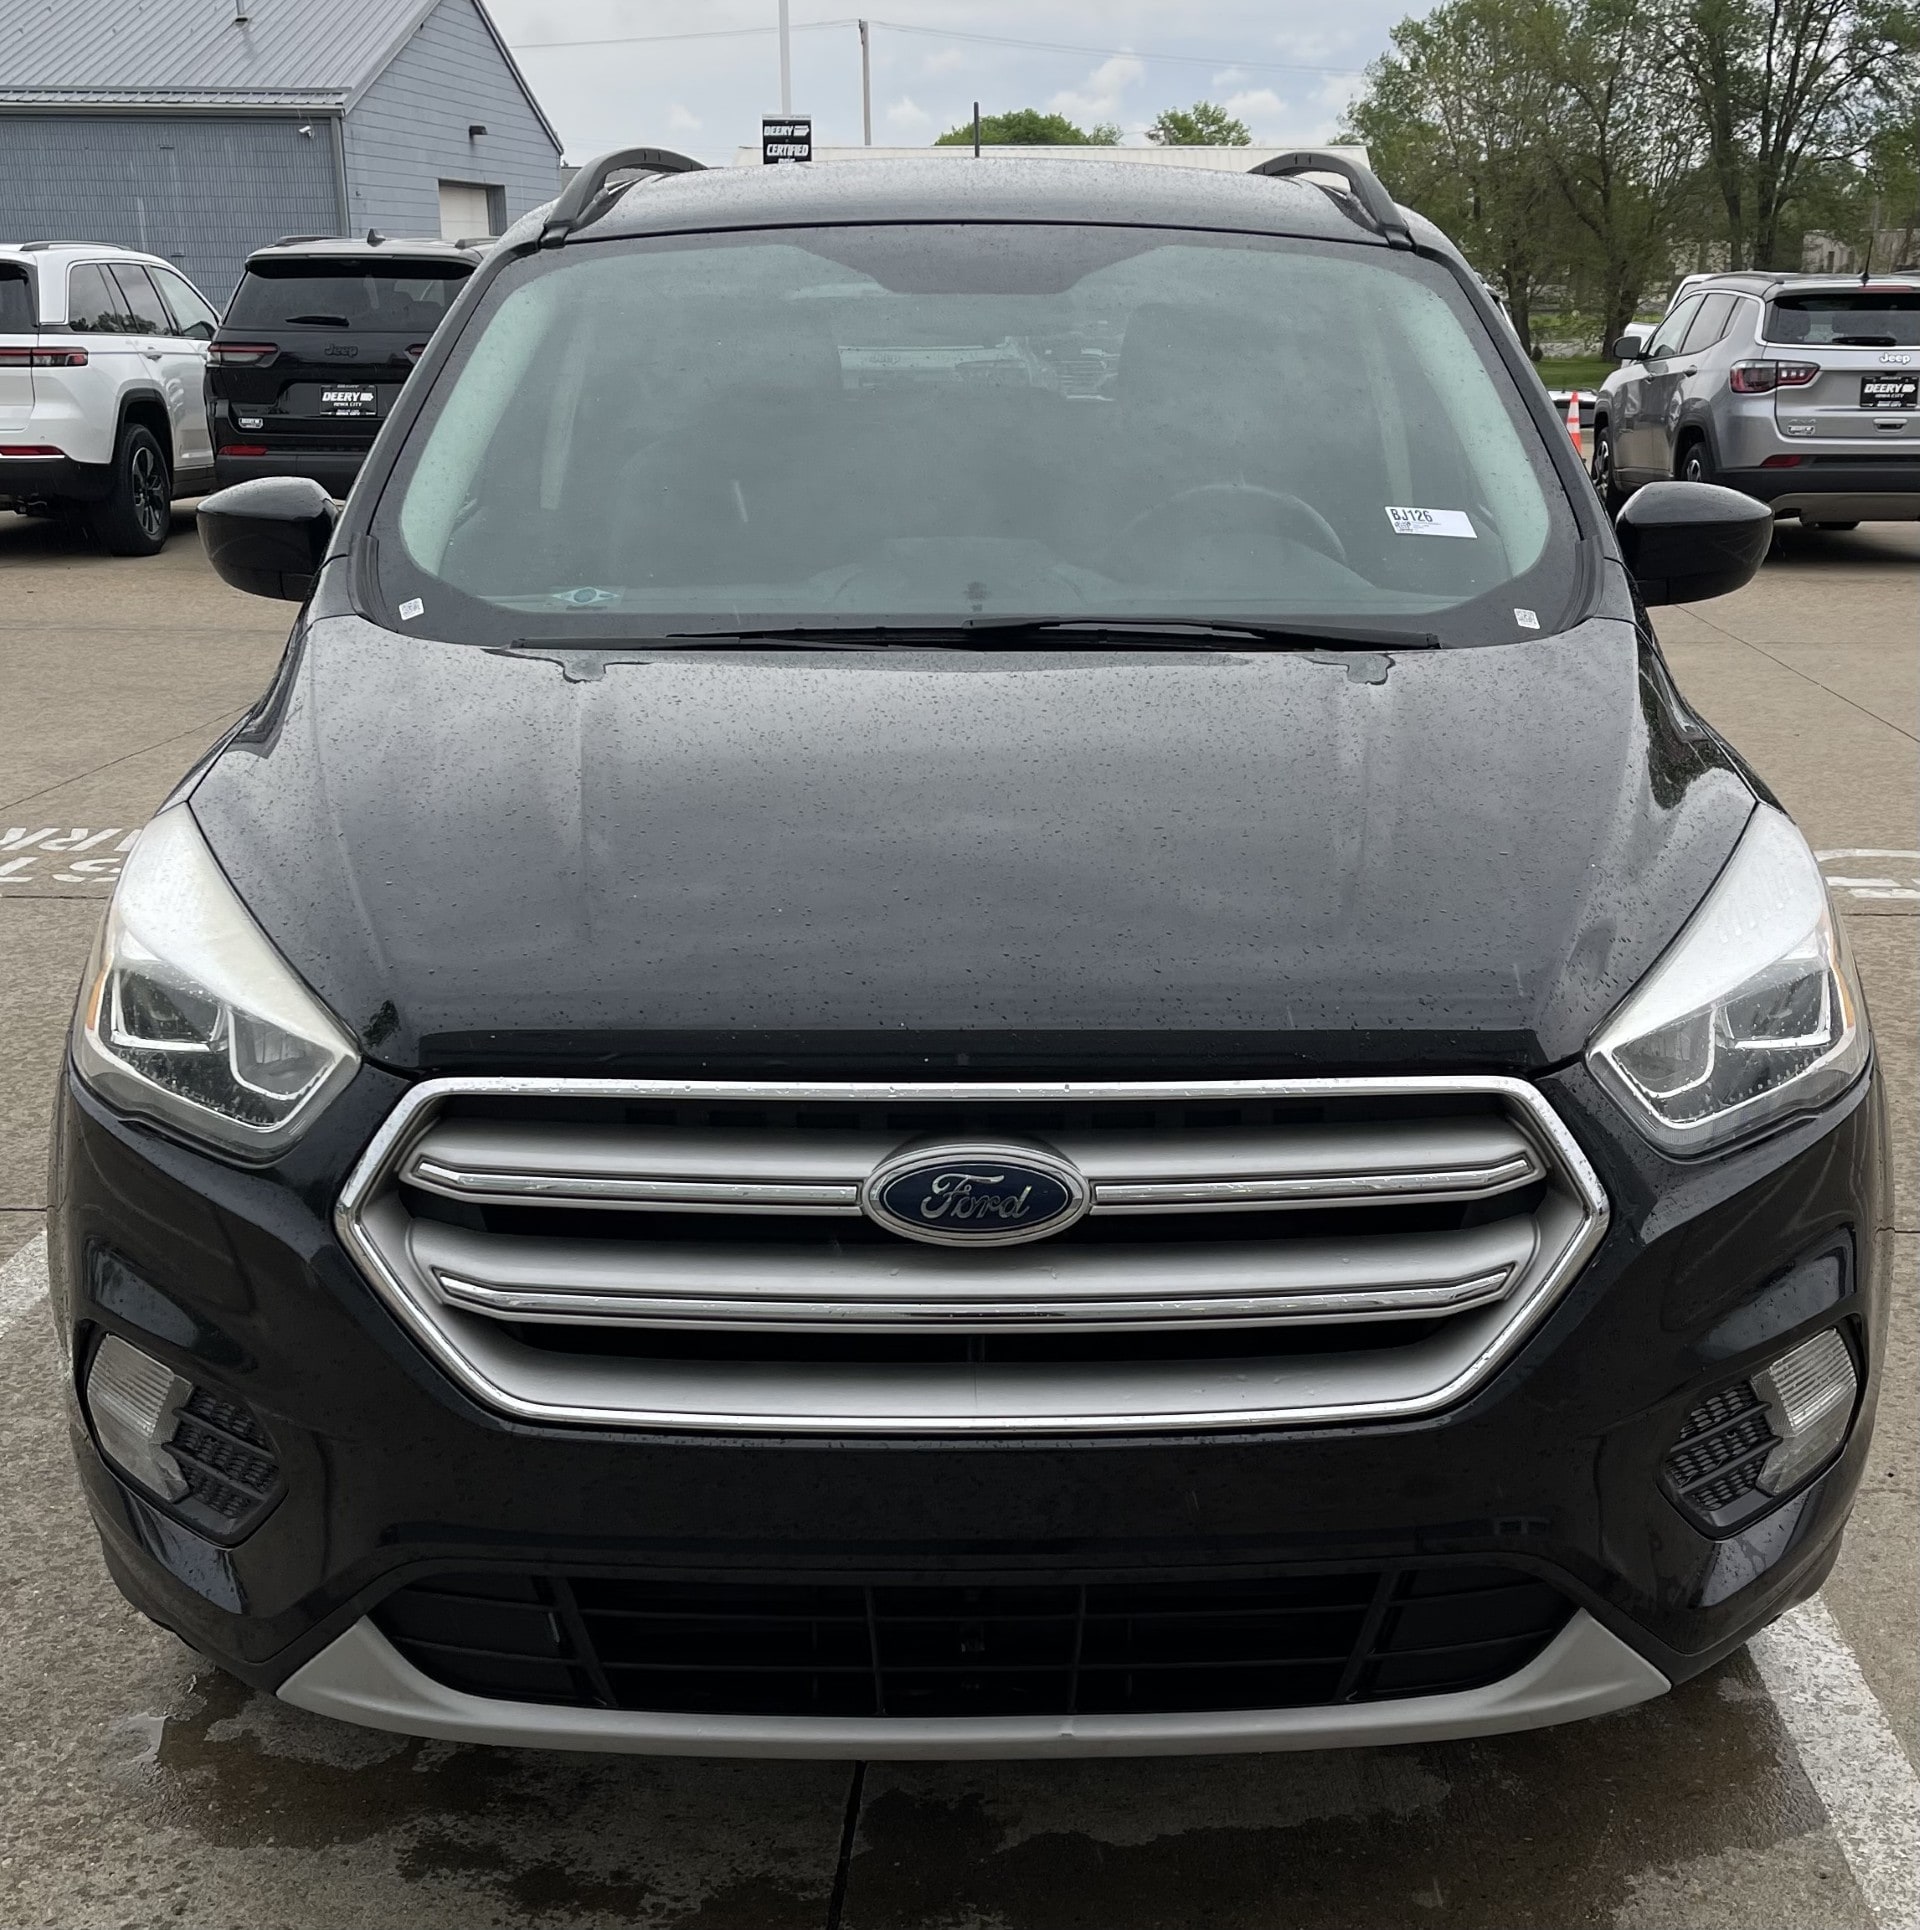 Used 2018 Ford Escape SEL with VIN 1FMCU0HD8JUA62714 for sale in Iowa City, IA